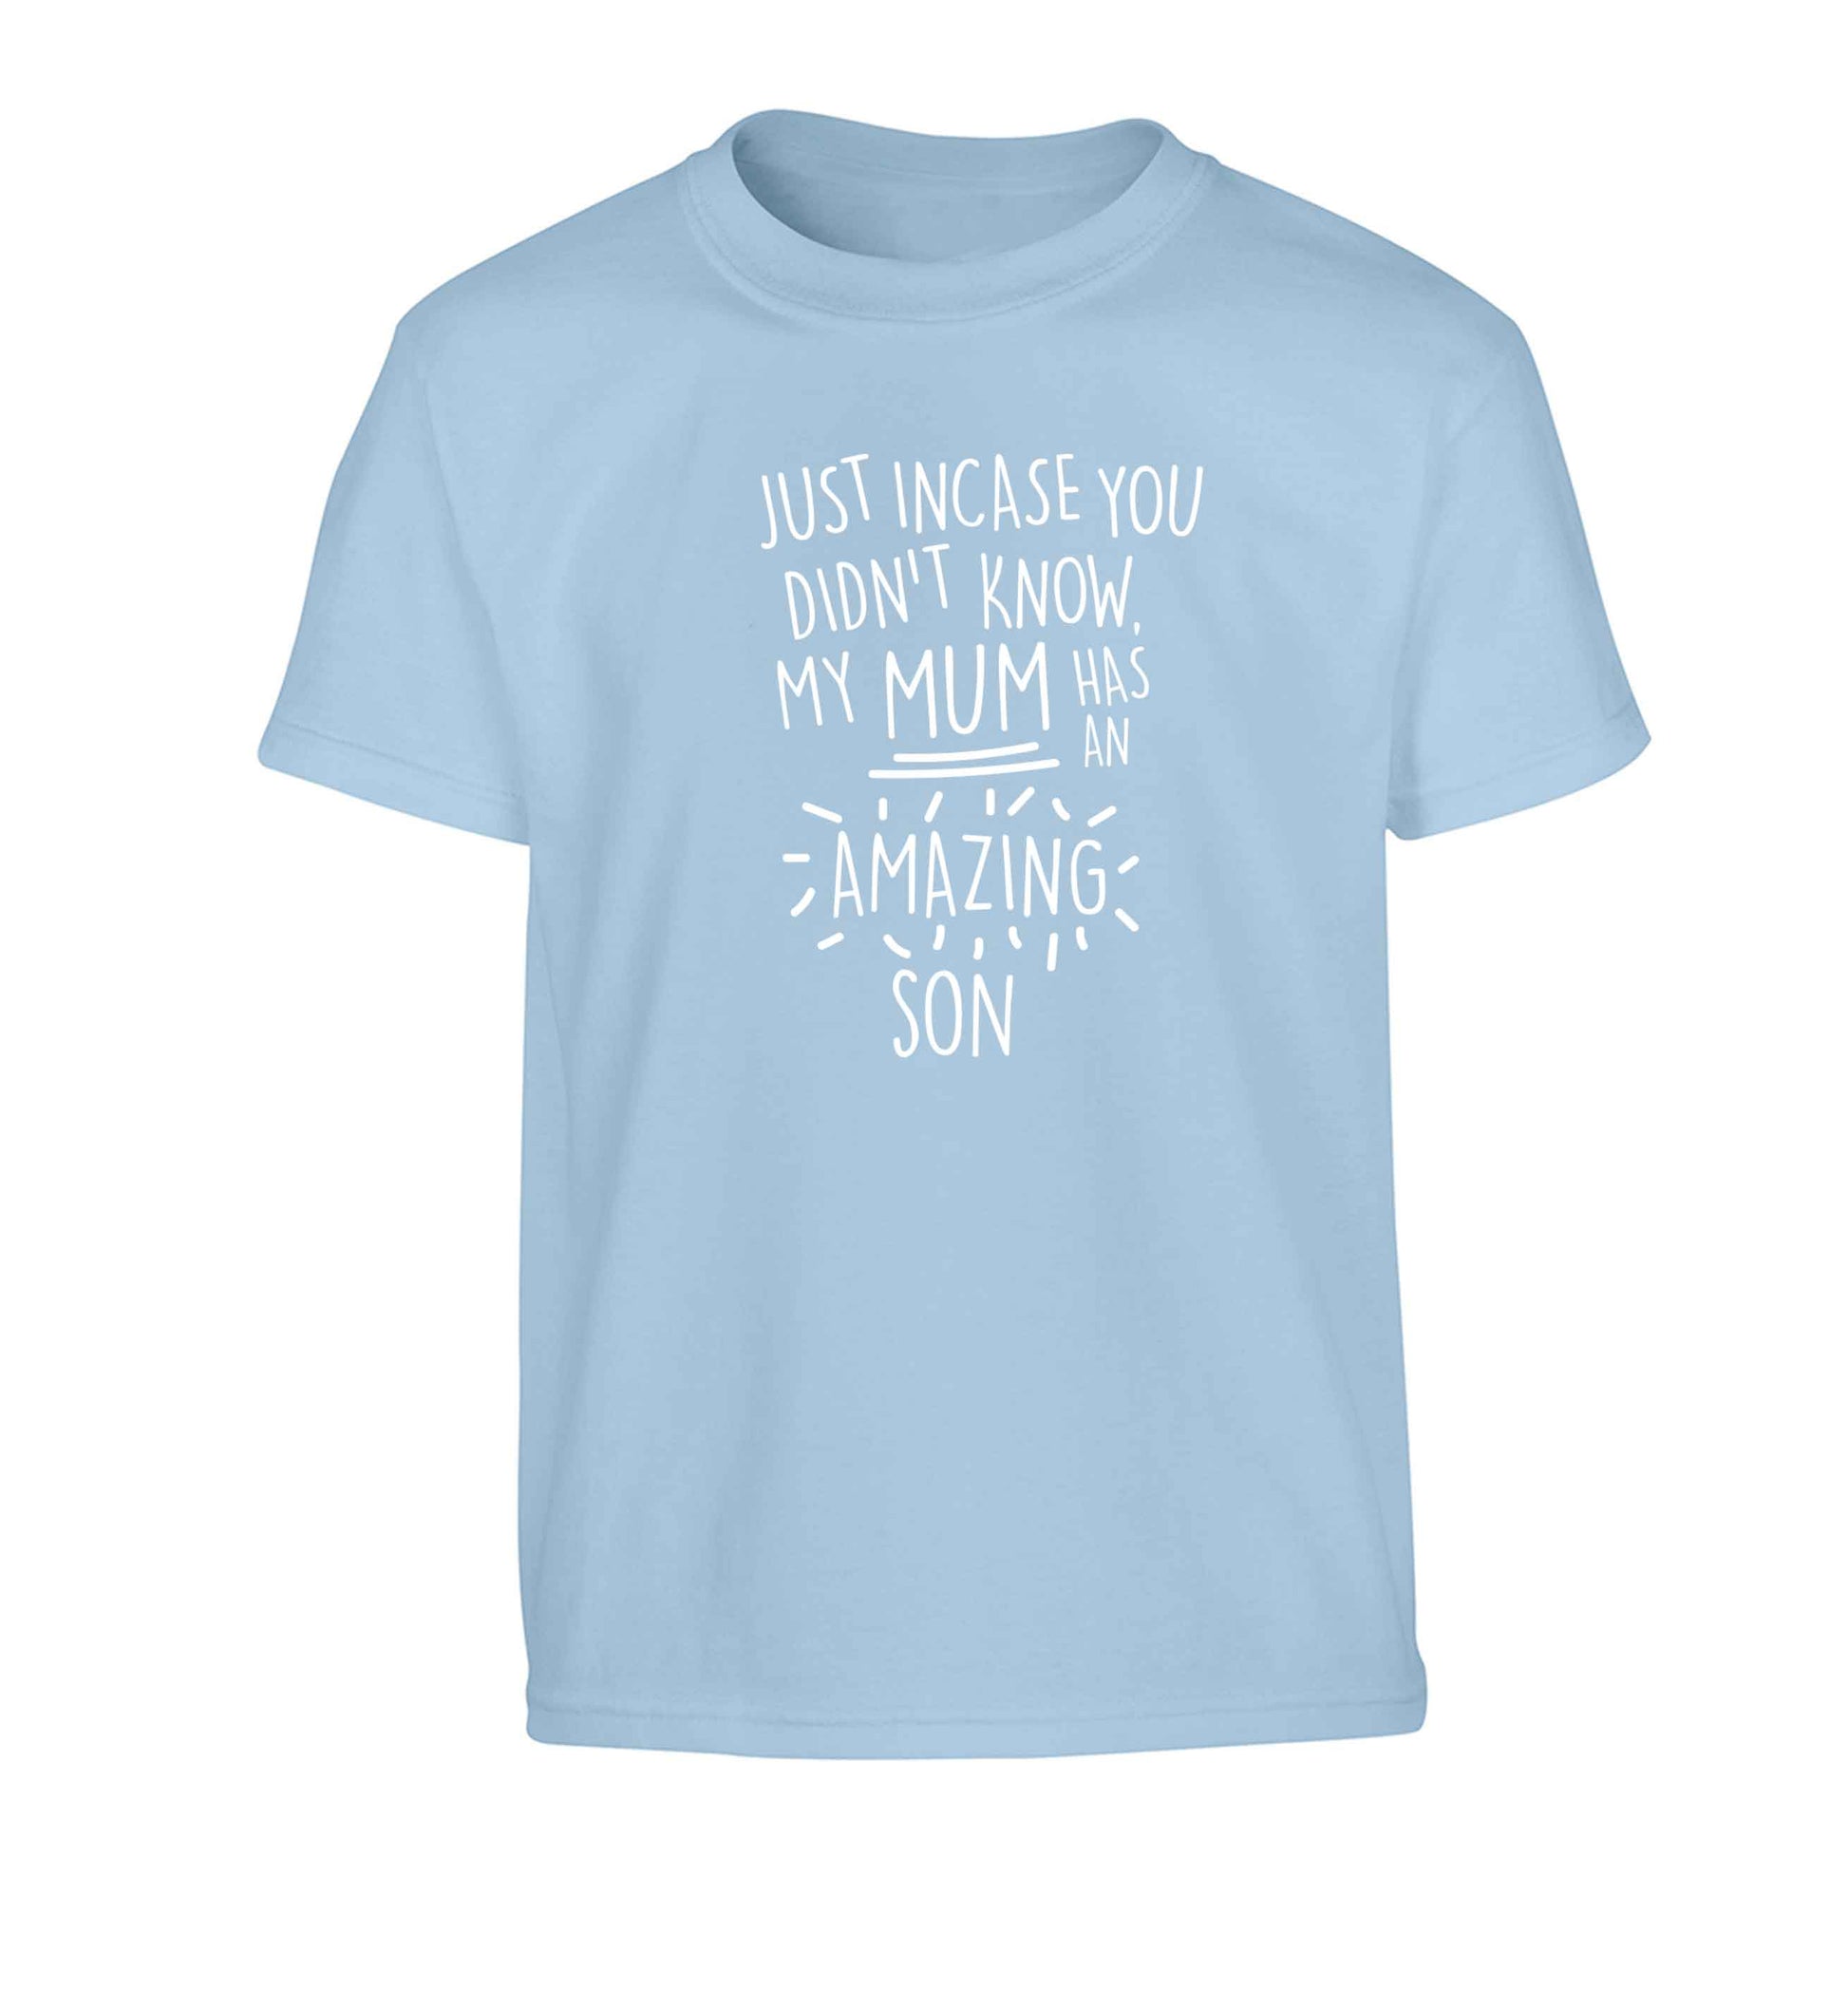 Just incase you didn't know my mum has an amazing son Children's light blue Tshirt 12-13 Years